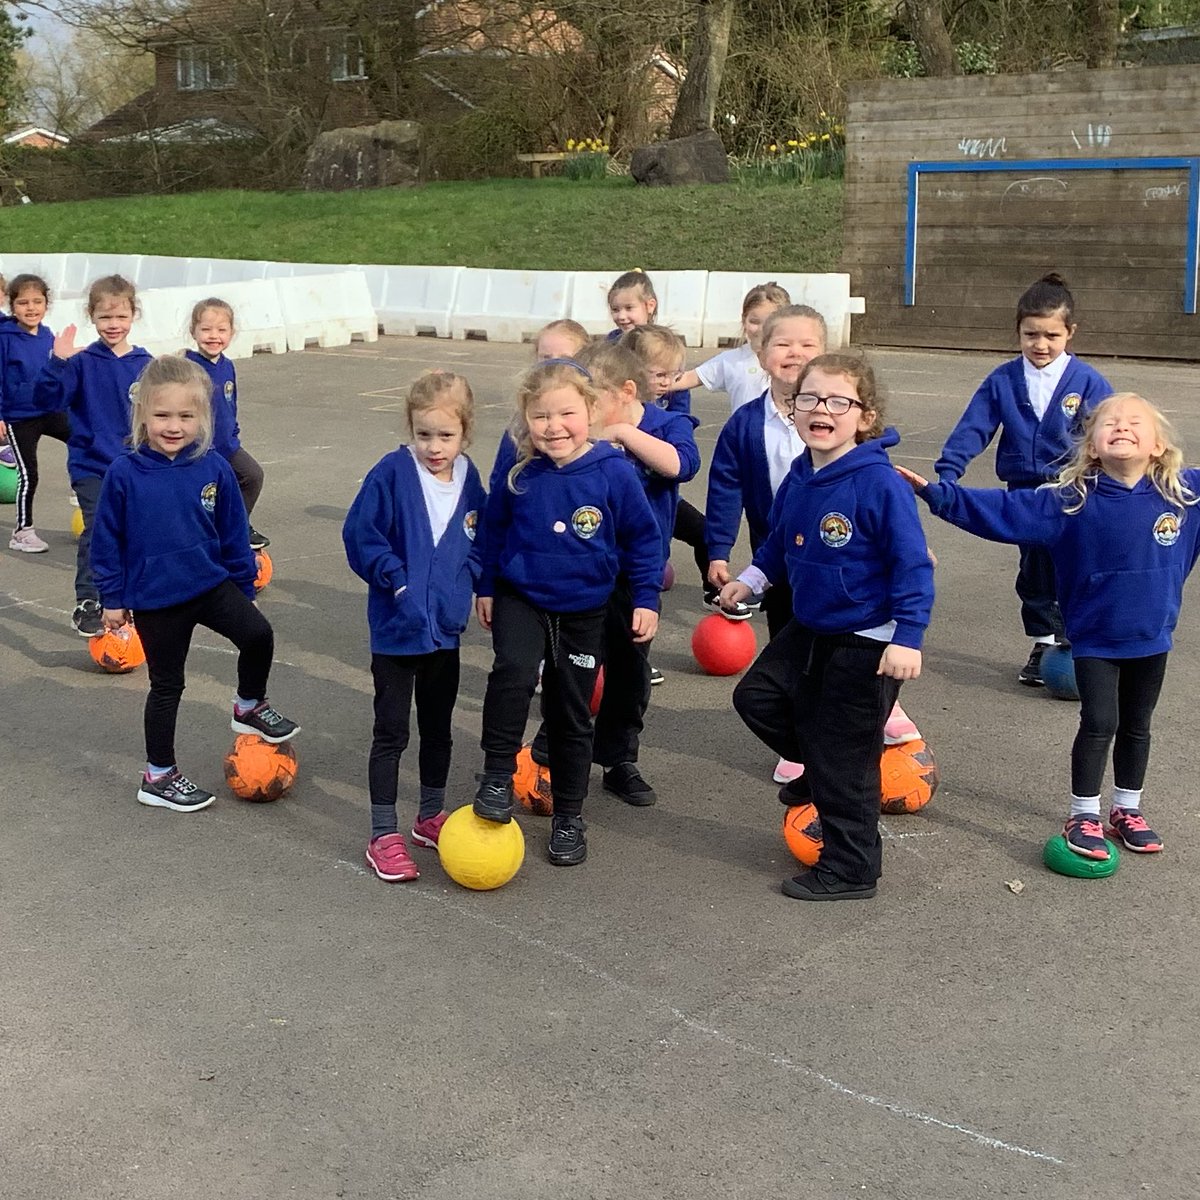 This afternoon all the girls from reception to Year 6 were invited to play football. We had a great afternoon! @southribbleSGO @Lionesses #LetGirlsPlay